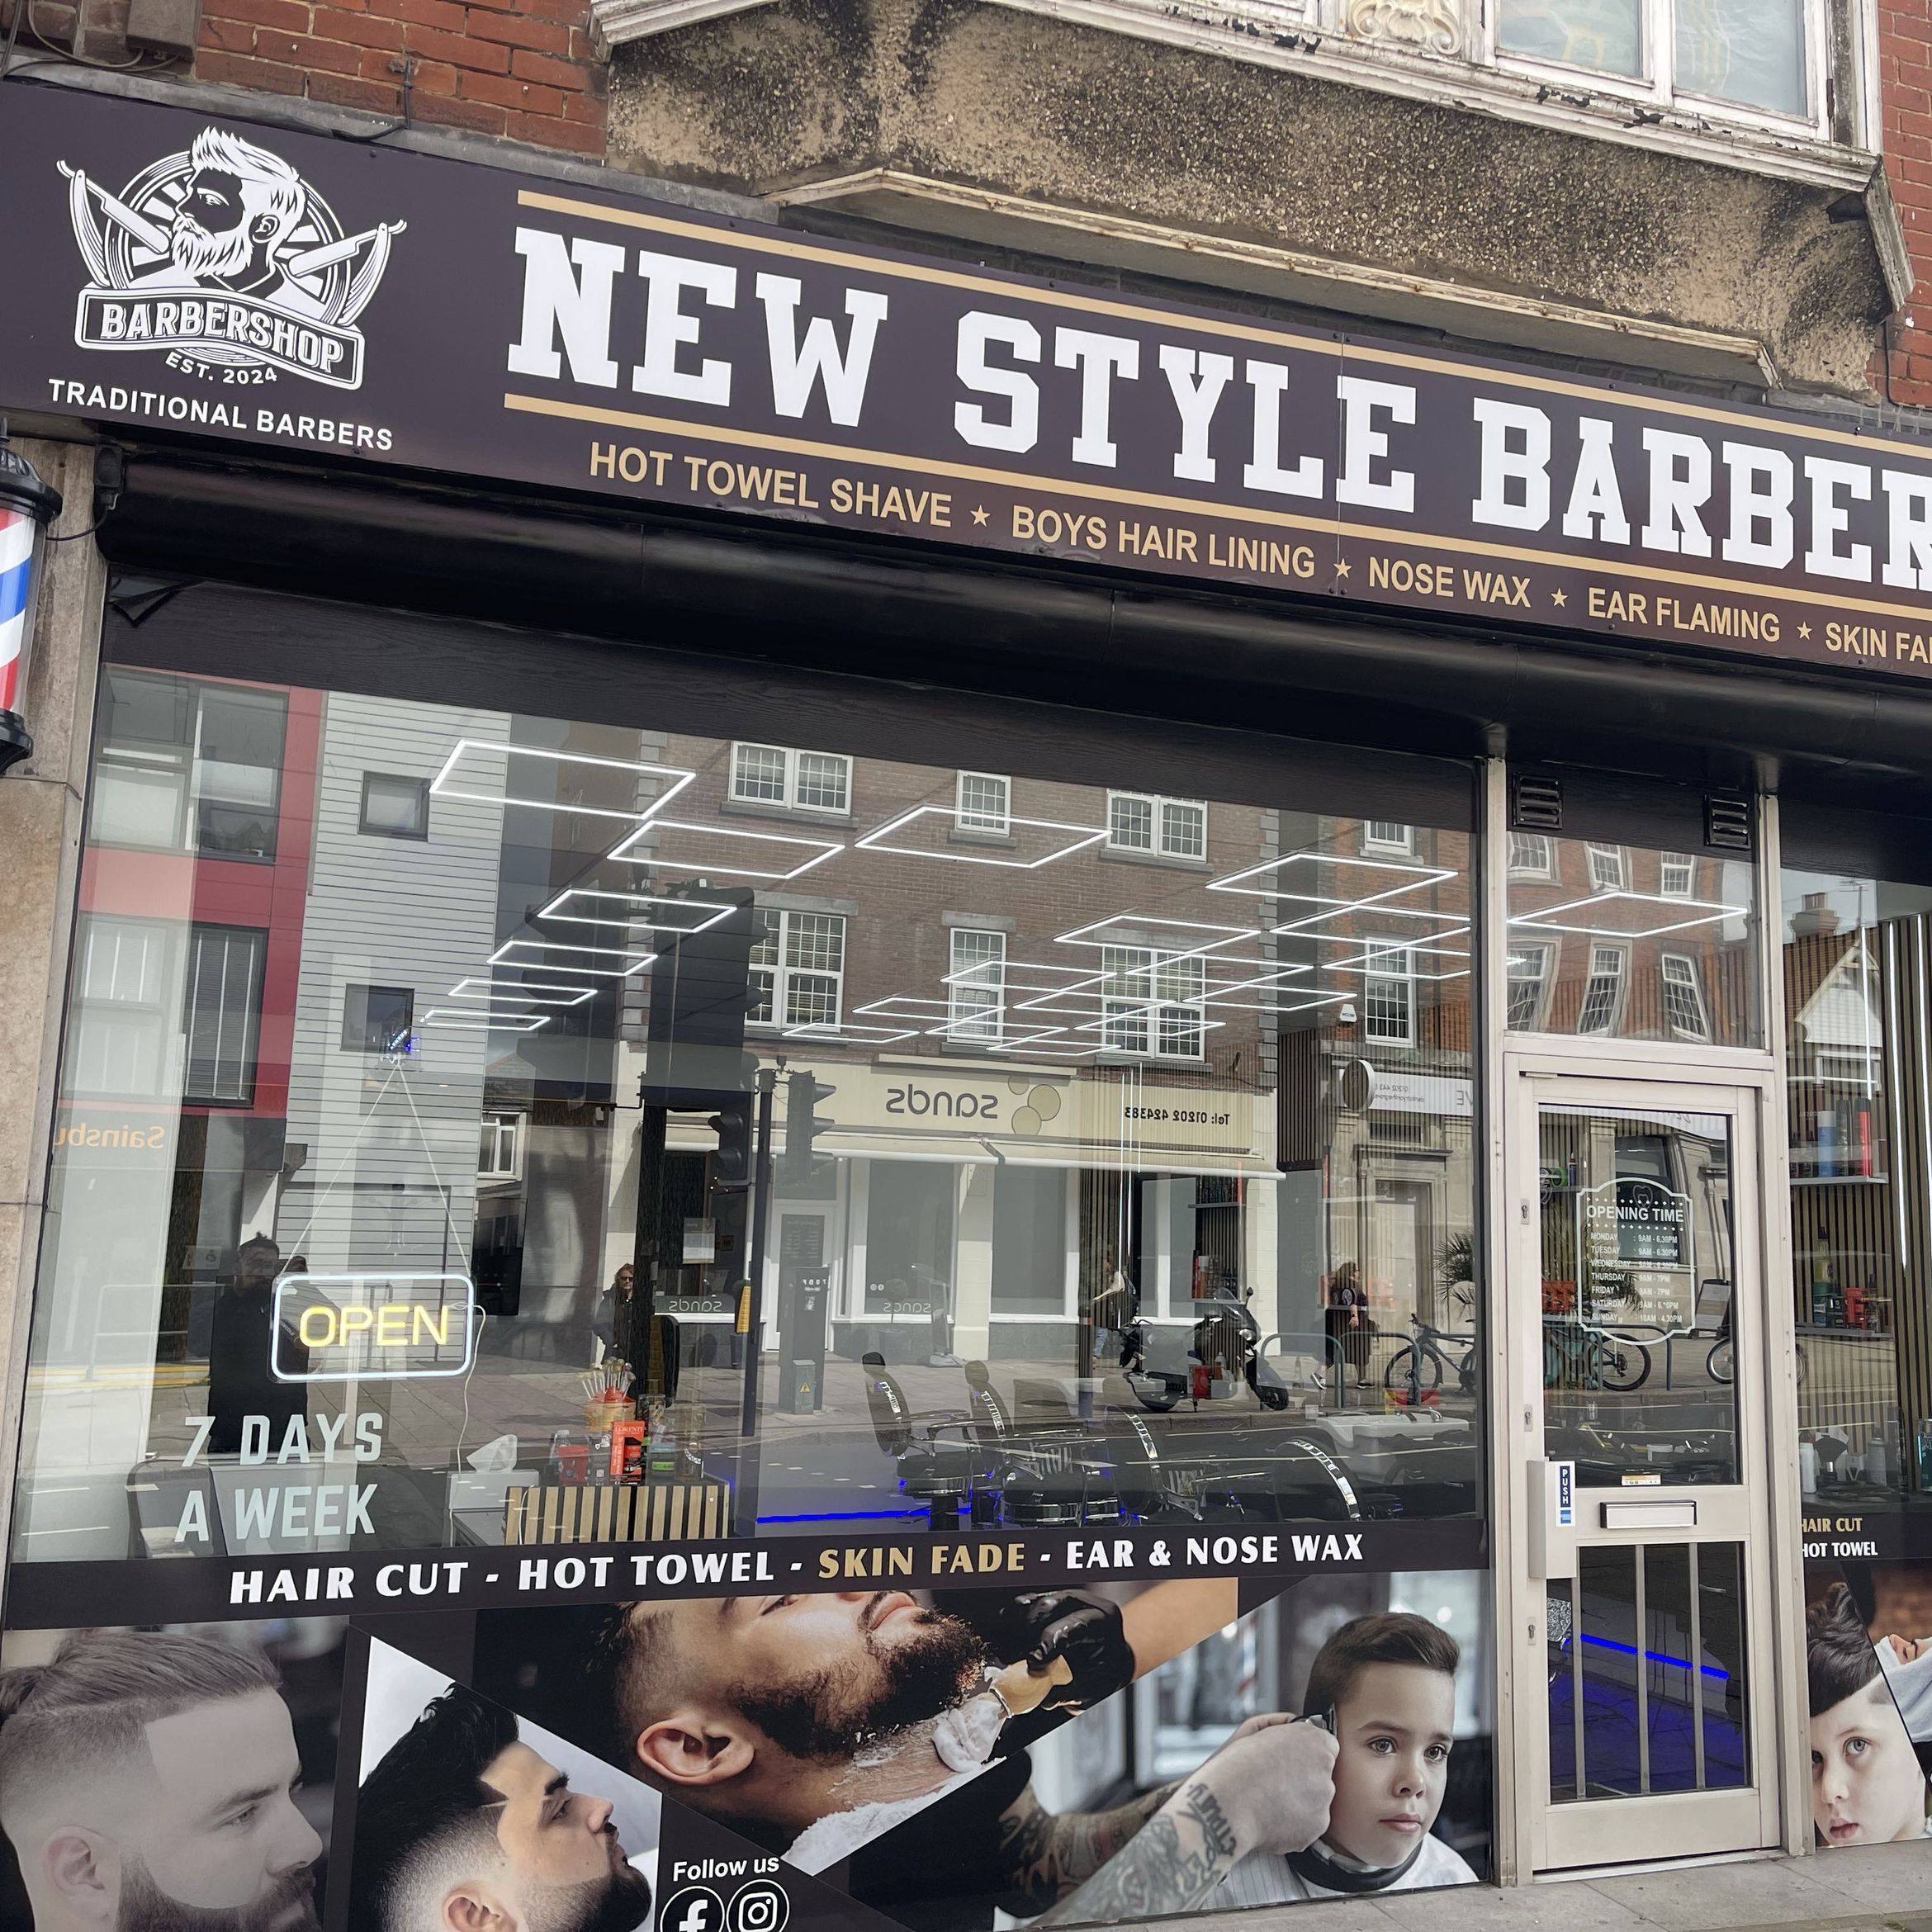 NEW STYLE BARBERS, 55 57 Southbourne Grove, NEW STYLE BARBERS, BH6 3QU, Bournemouth